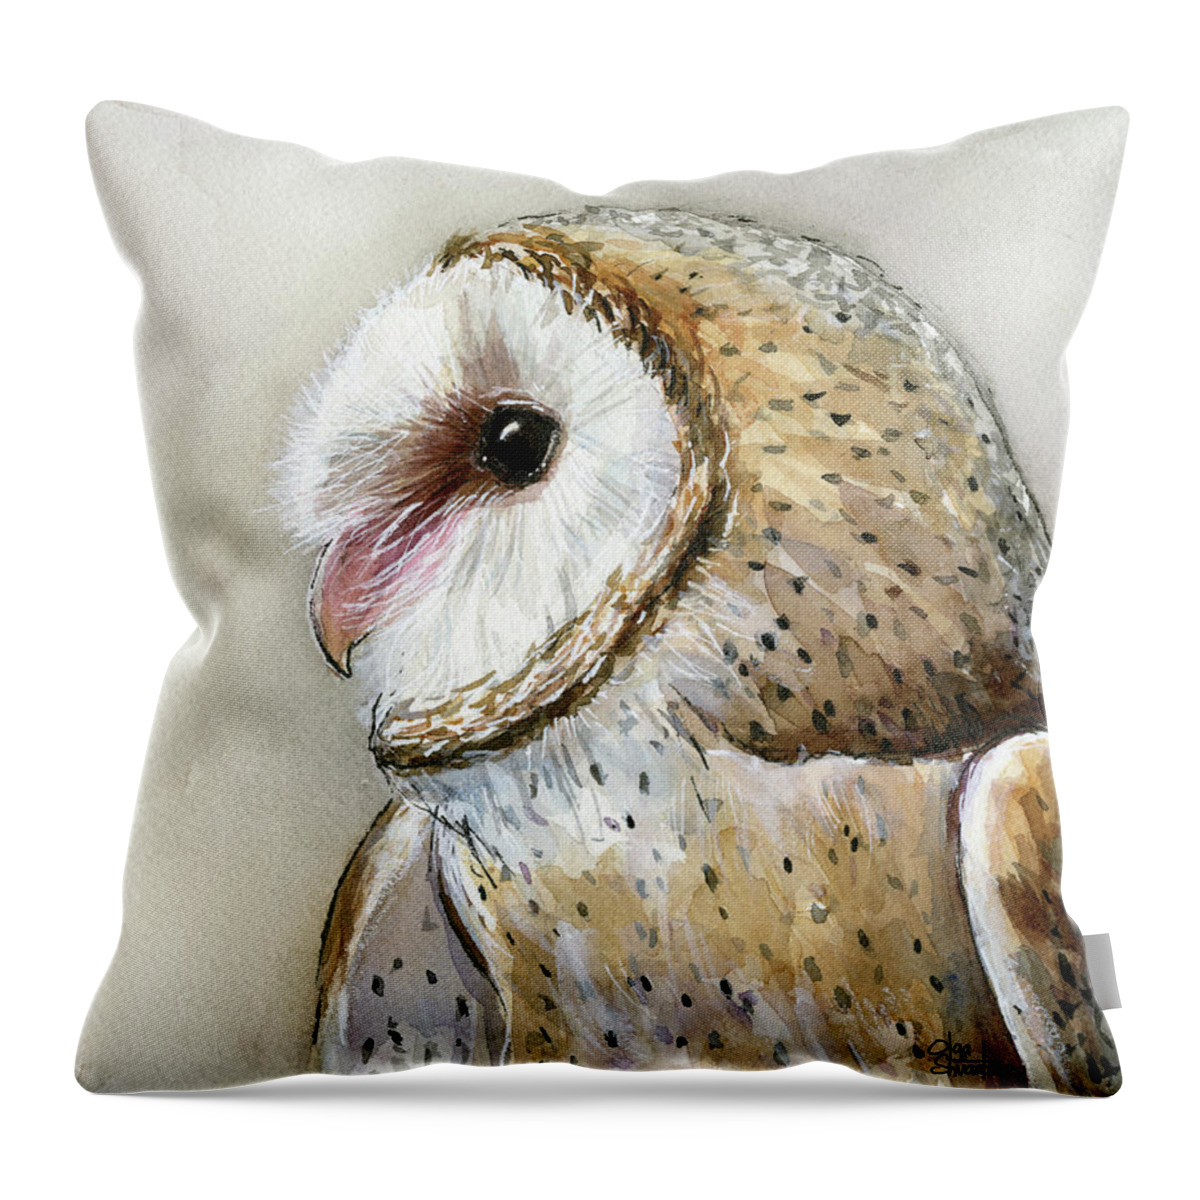 Owl Throw Pillow featuring the painting Barn Owl Watercolor by Olga Shvartsur